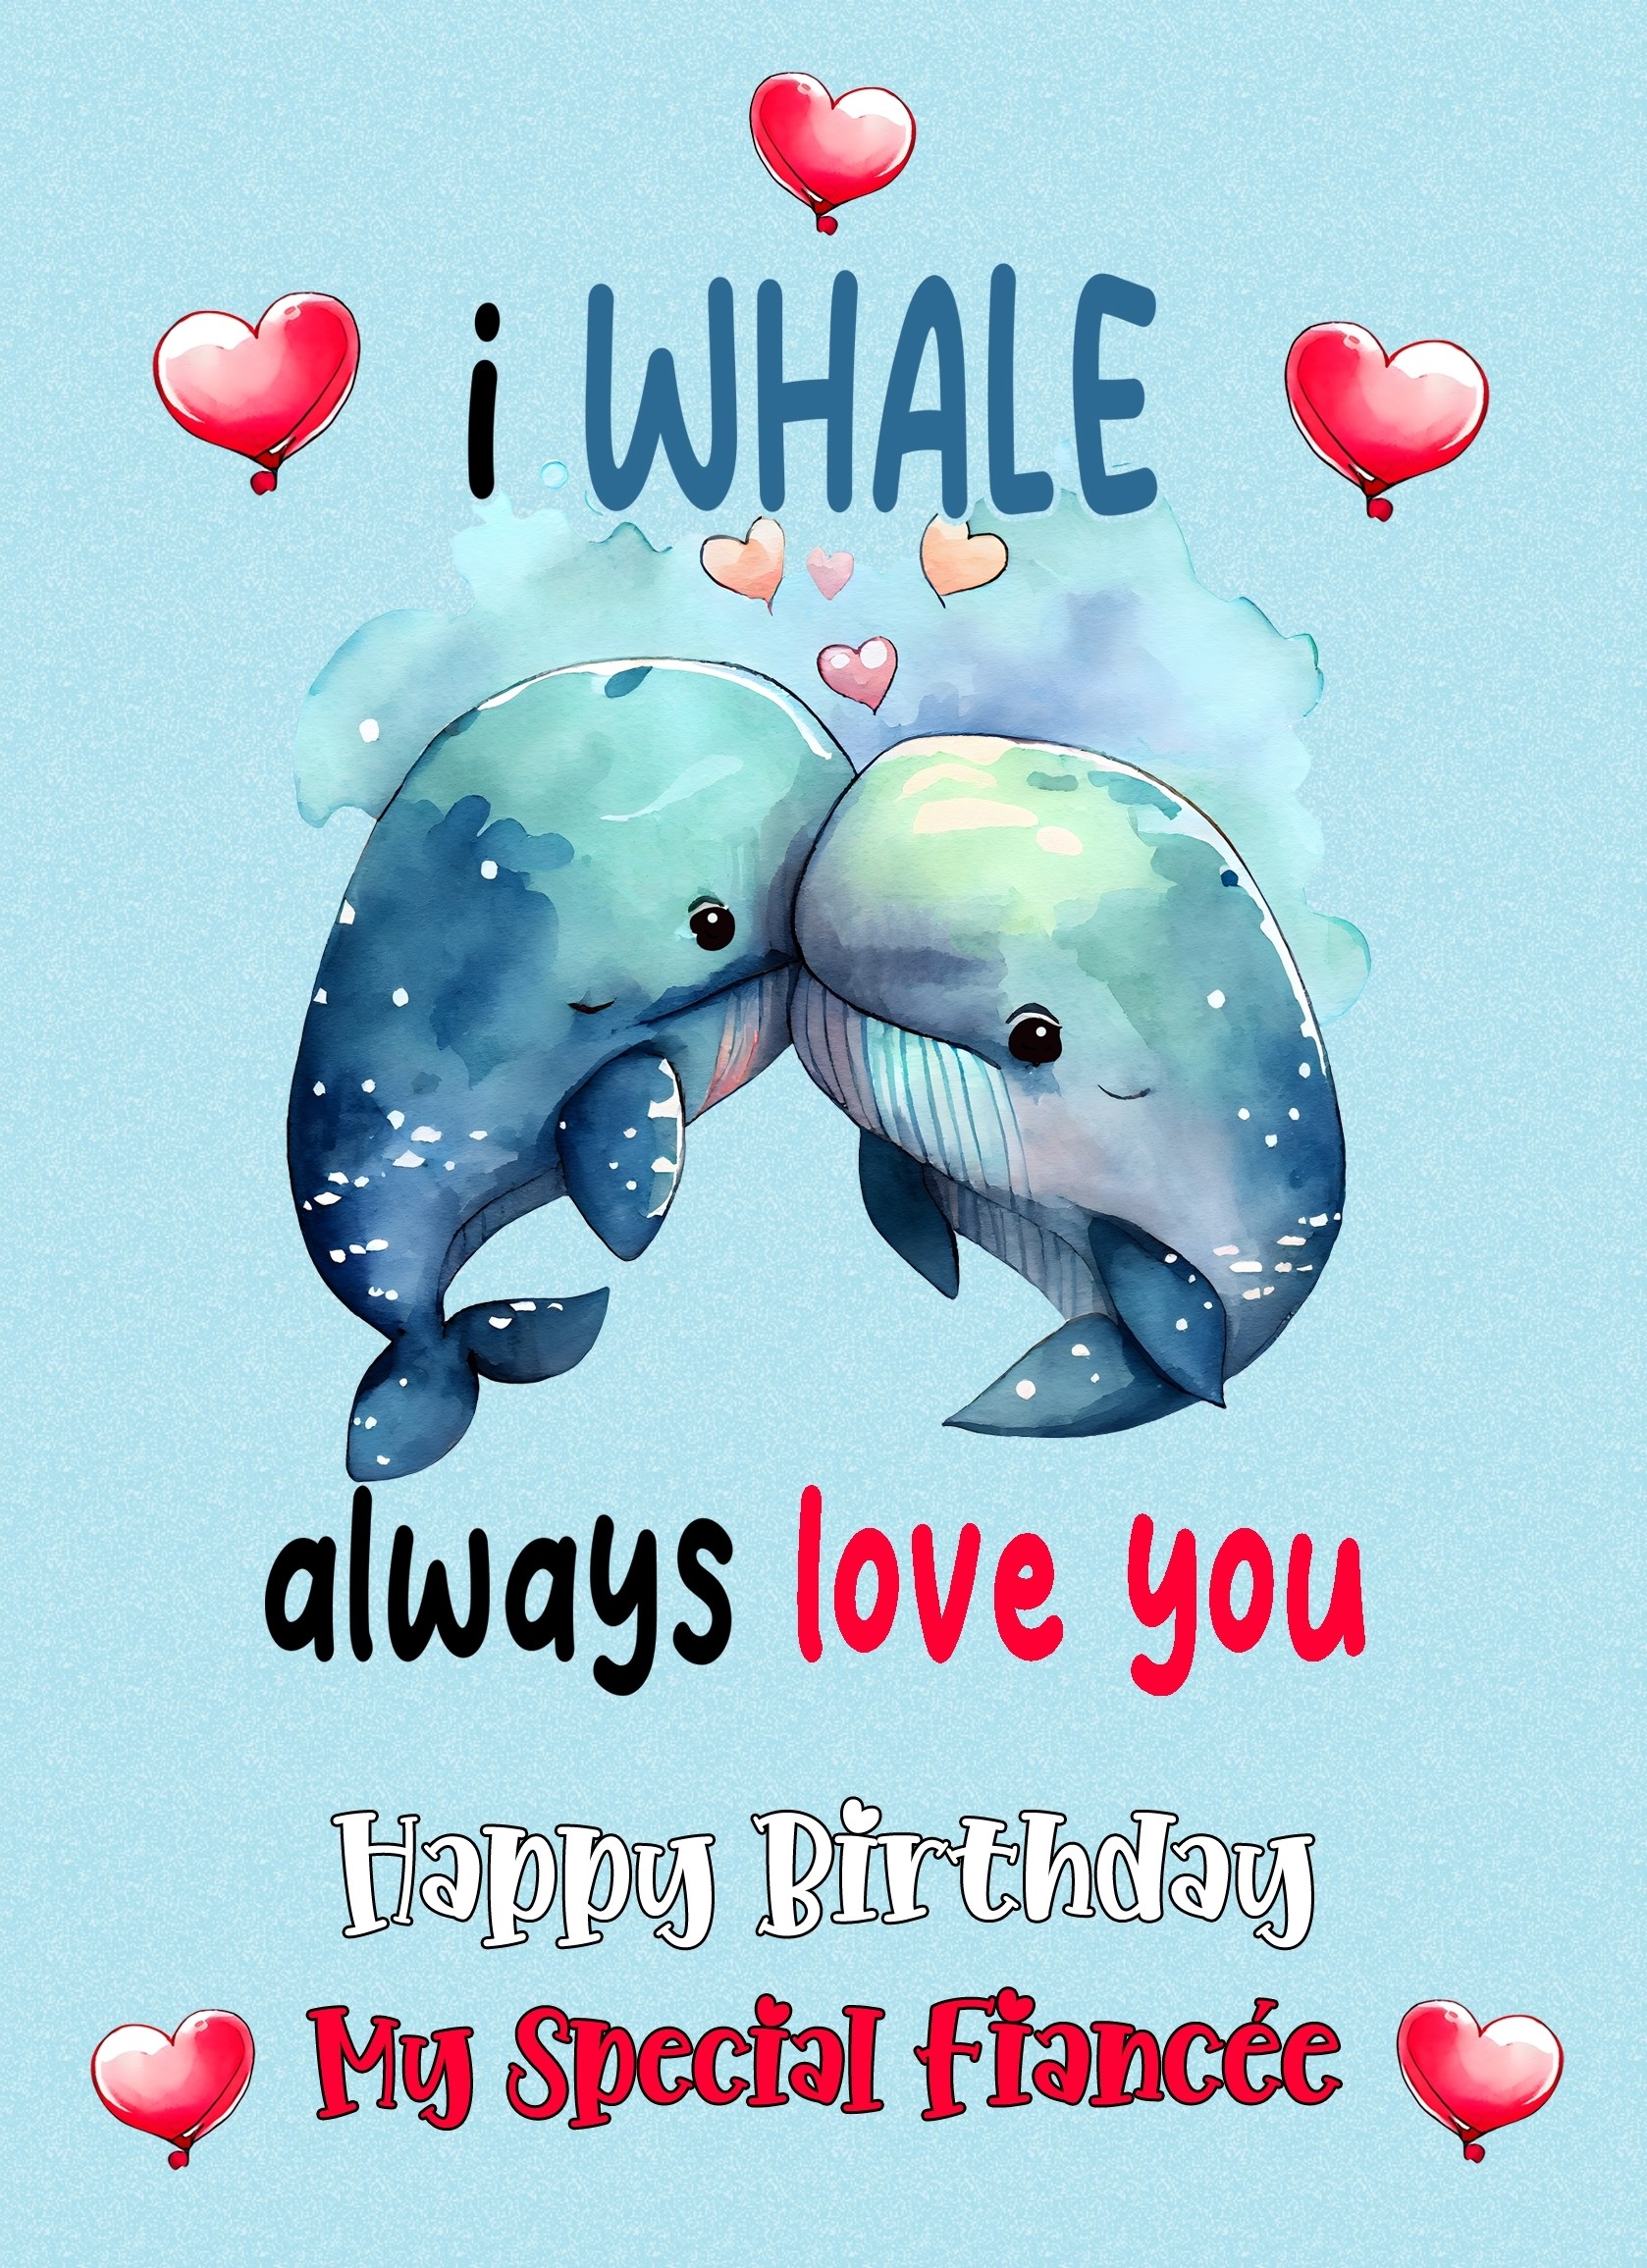 Funny Pun Romantic Birthday Card for Fiancee (Whale)